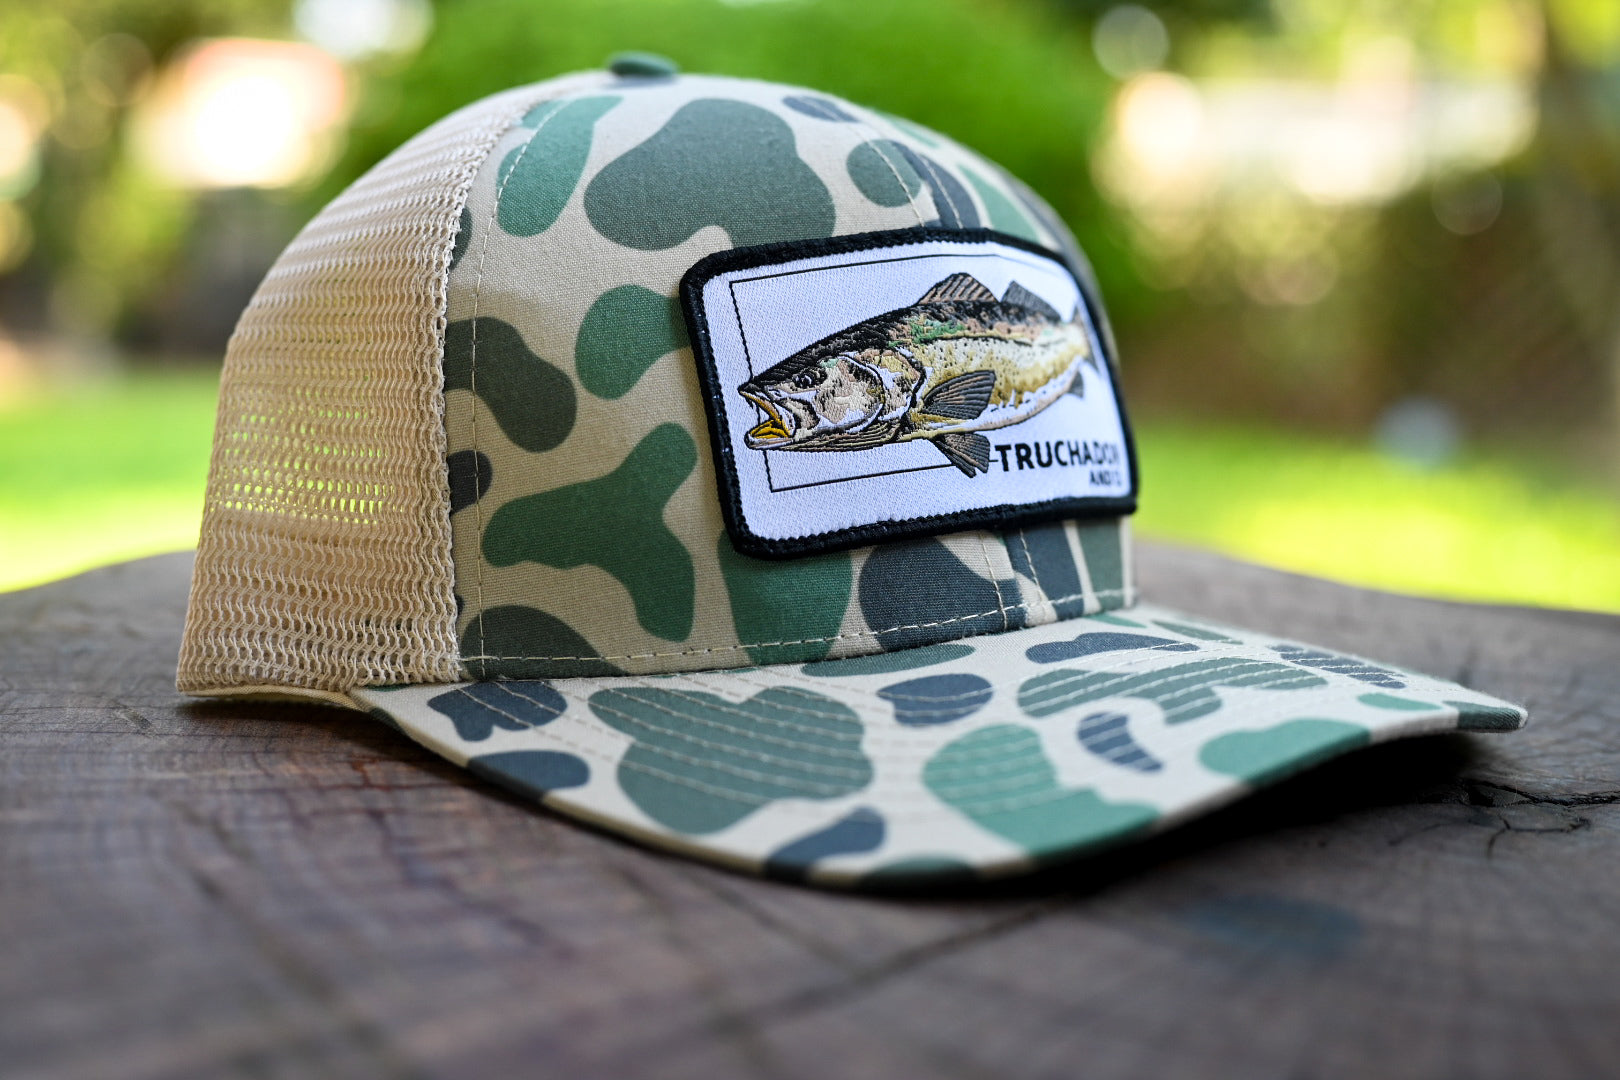 Flying Fisherman Men's Camo Bass Patch Trucker Hat at Tractor Supply Co.